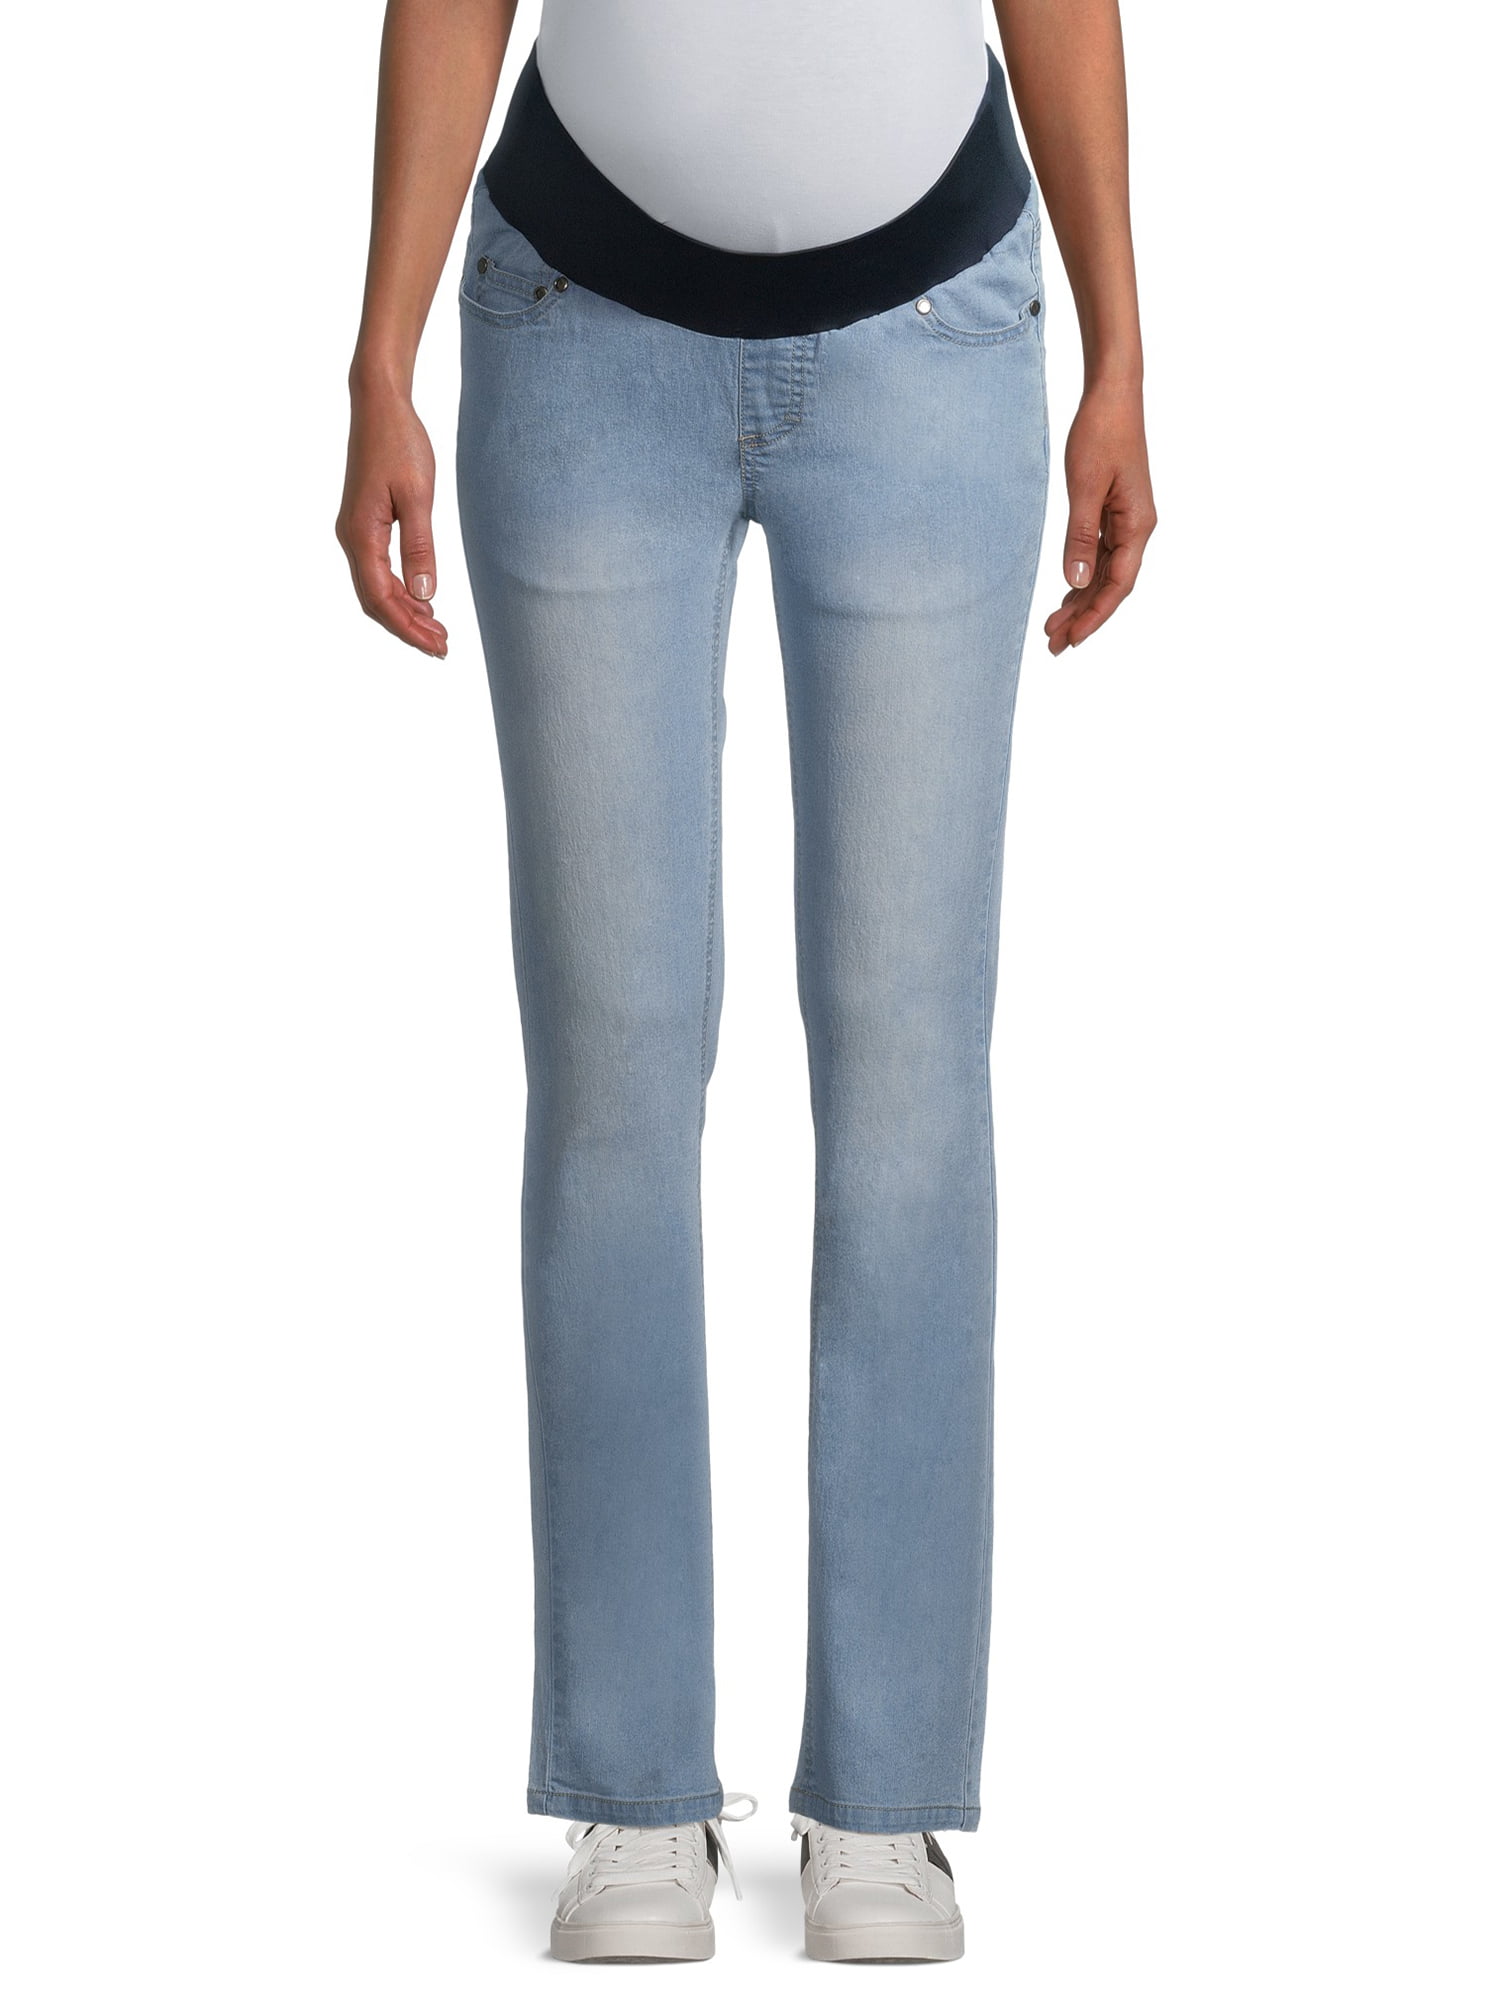 Best Maternity Jeans 2023  Forbes Vetted